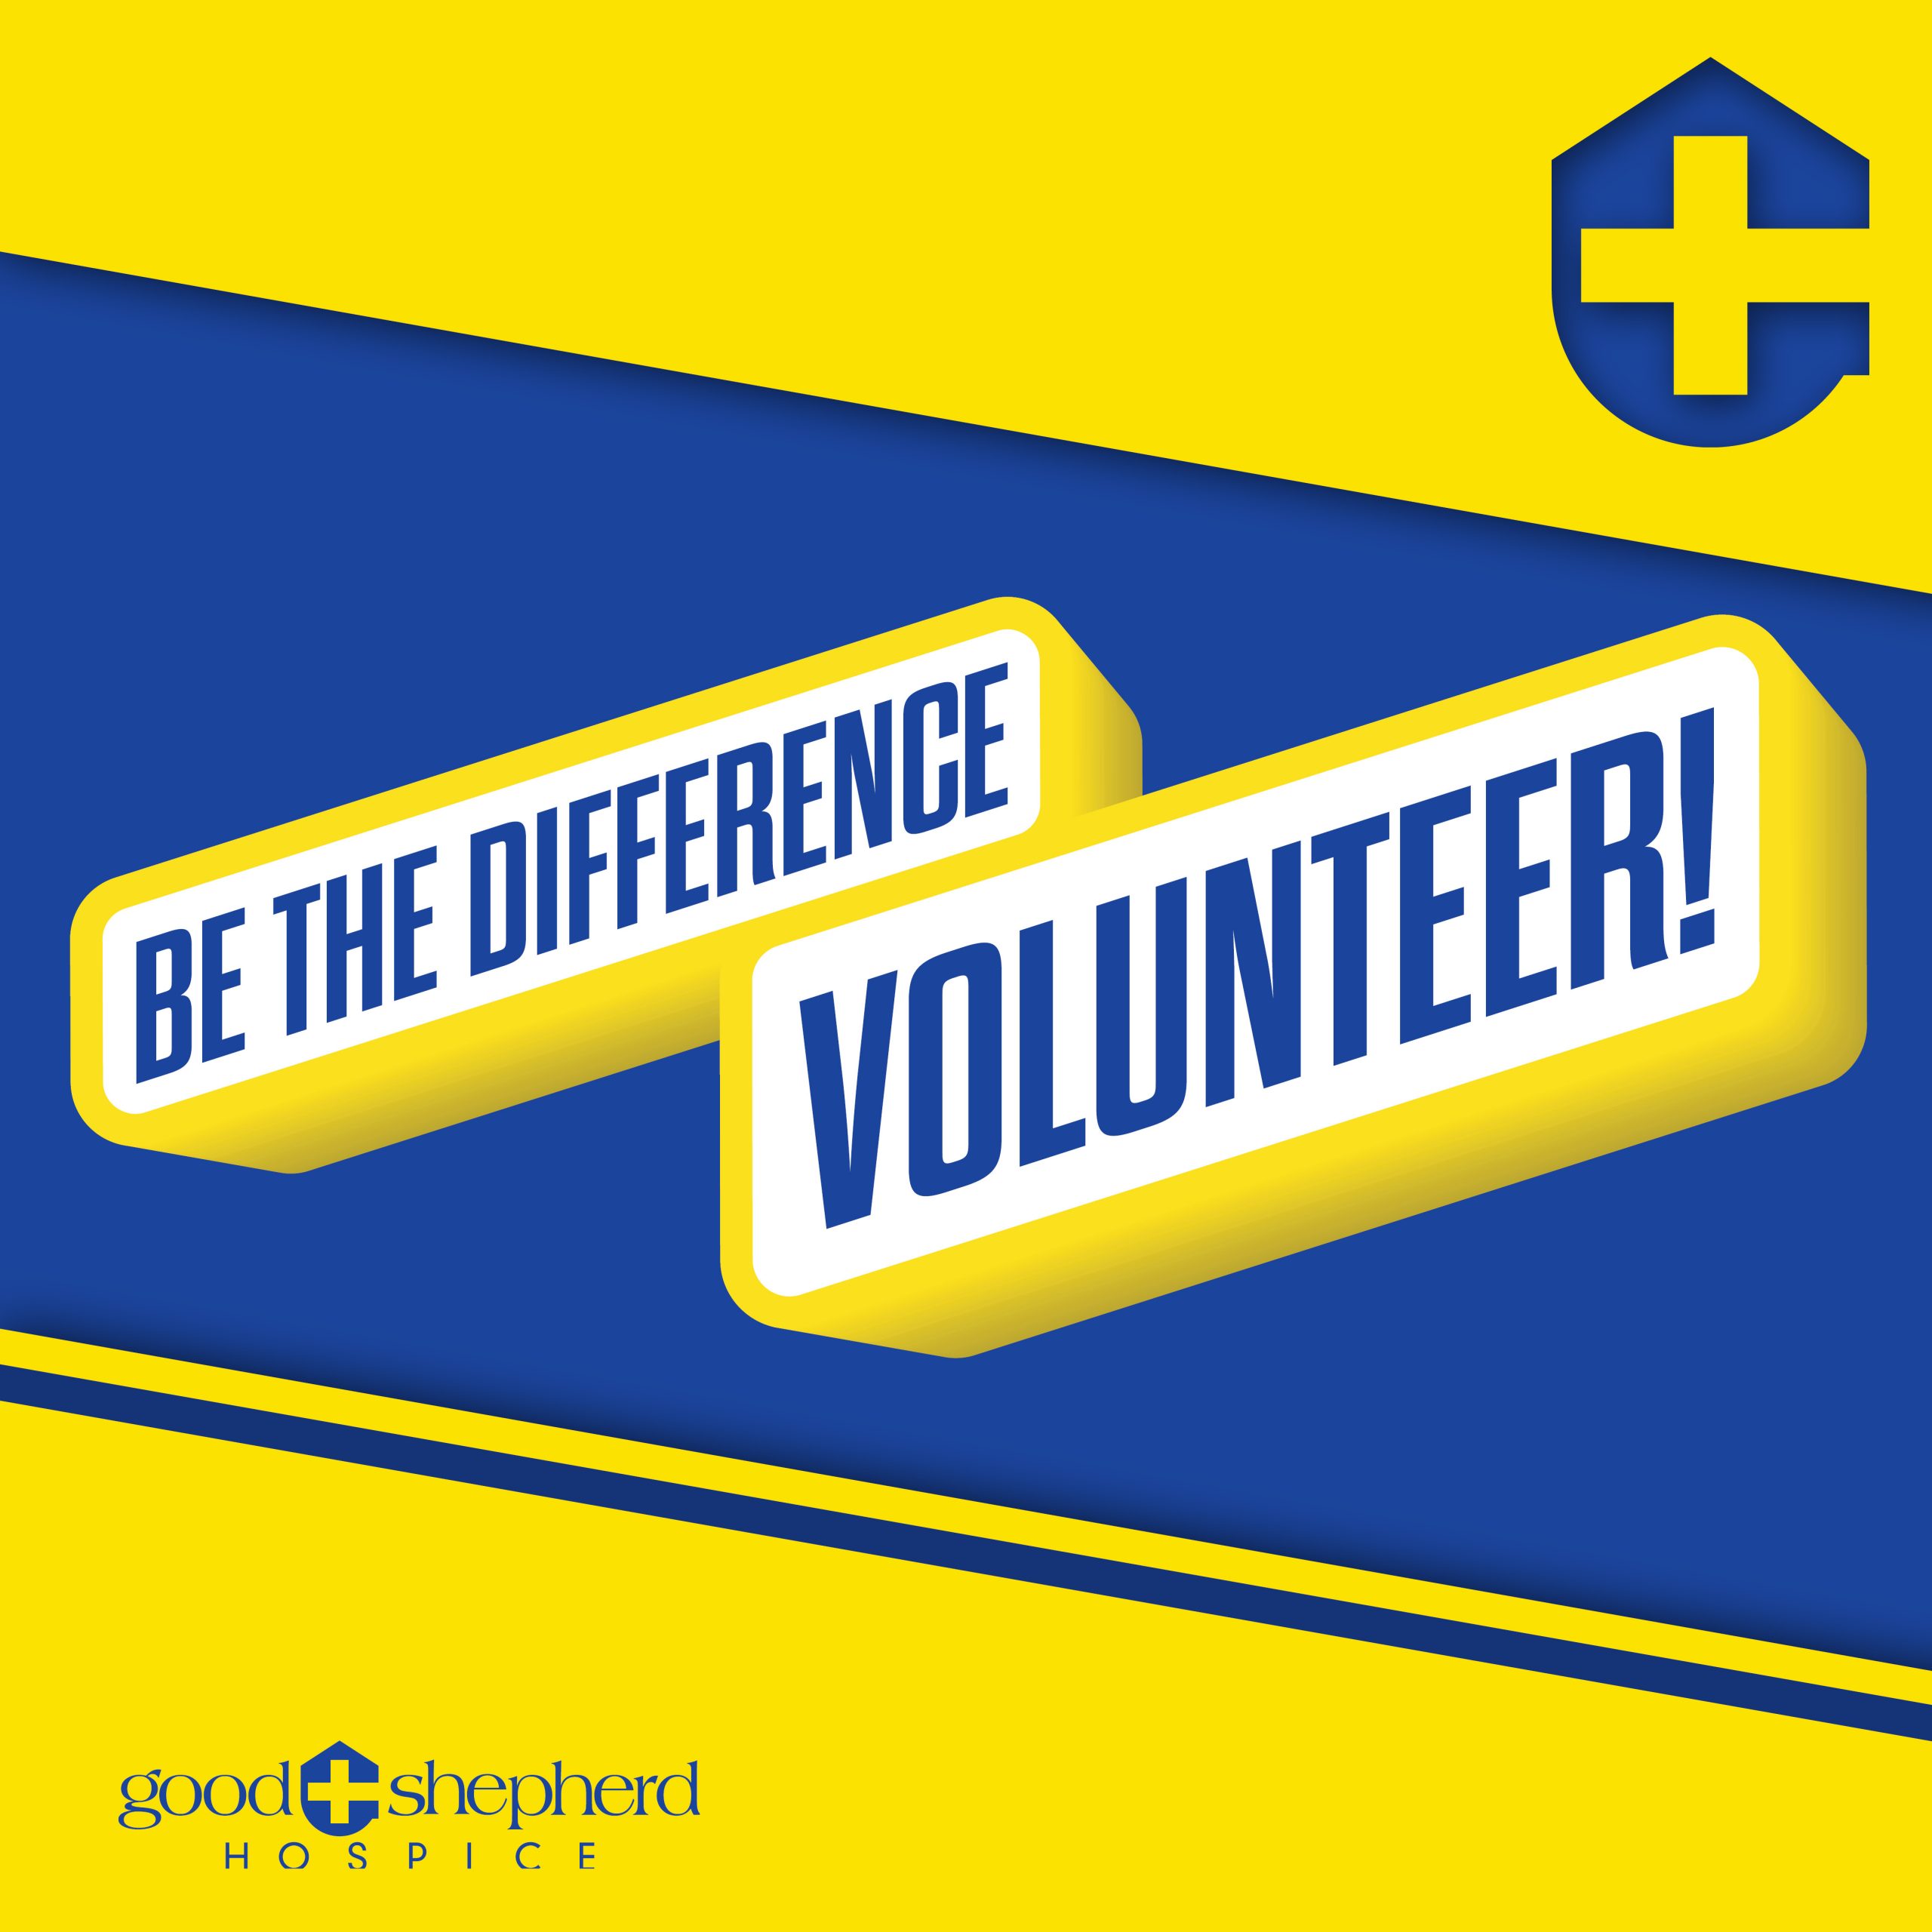 April 2022 – Be the Difference. Volunteer! – National Volunteer Month